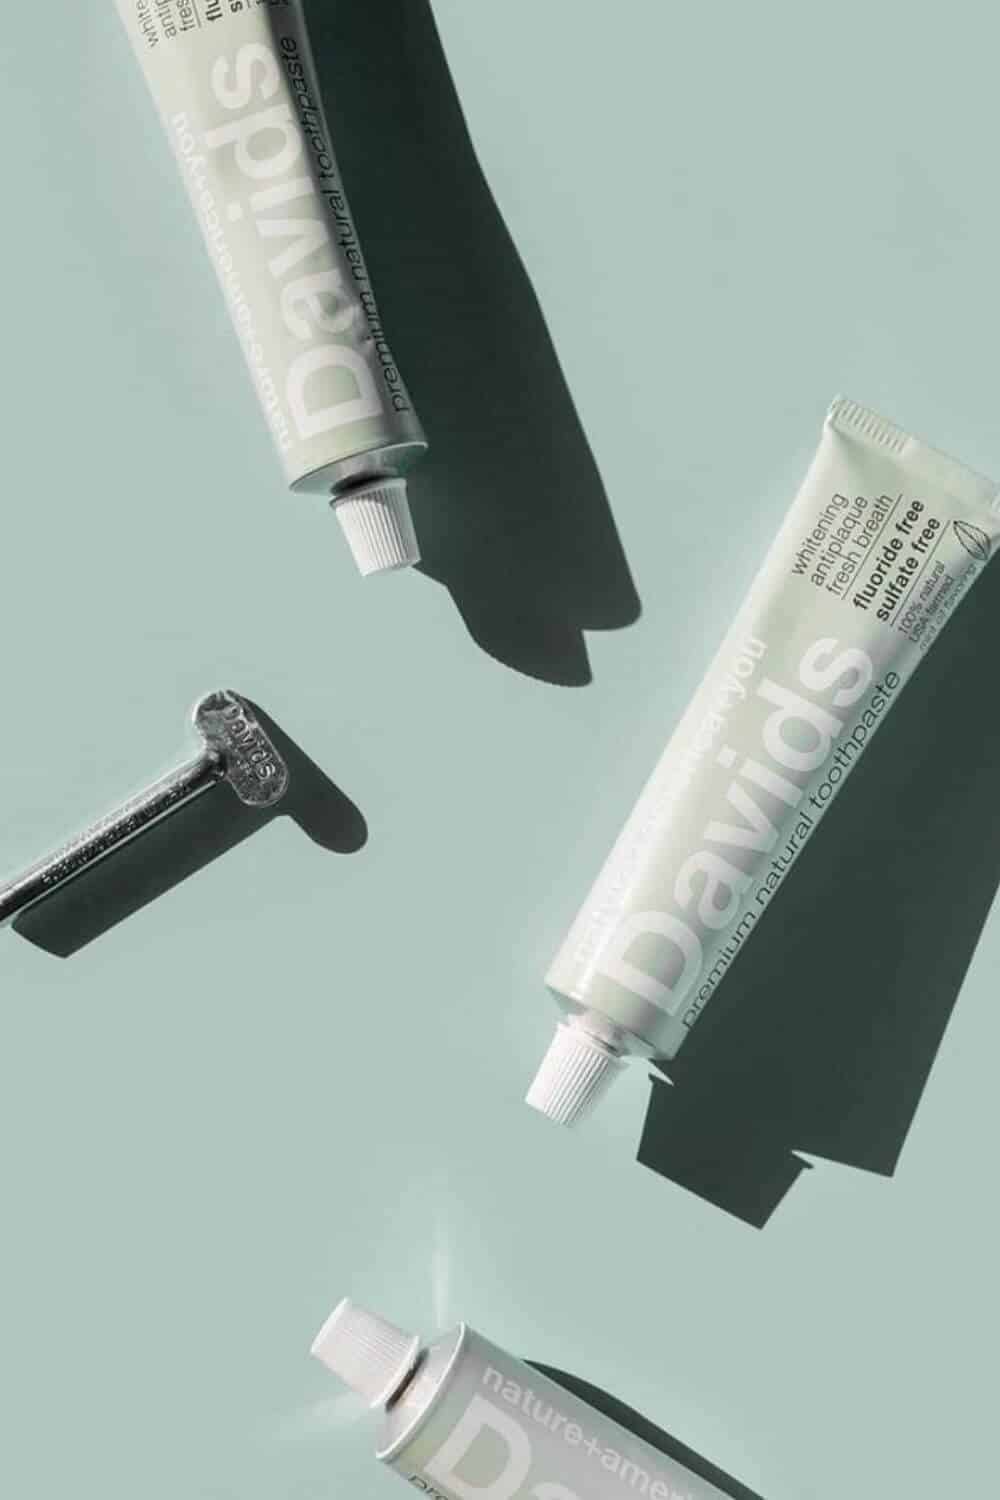 Toothpaste is probably the most regularly used body care product around which is why it was one of the first products we scrutinized for sustainable, cruelty free toothpaste alternatives... Image by David's Natural Toothpaste #crueltyfreetoothpaste #vegantoothpaste #sustainablejungle